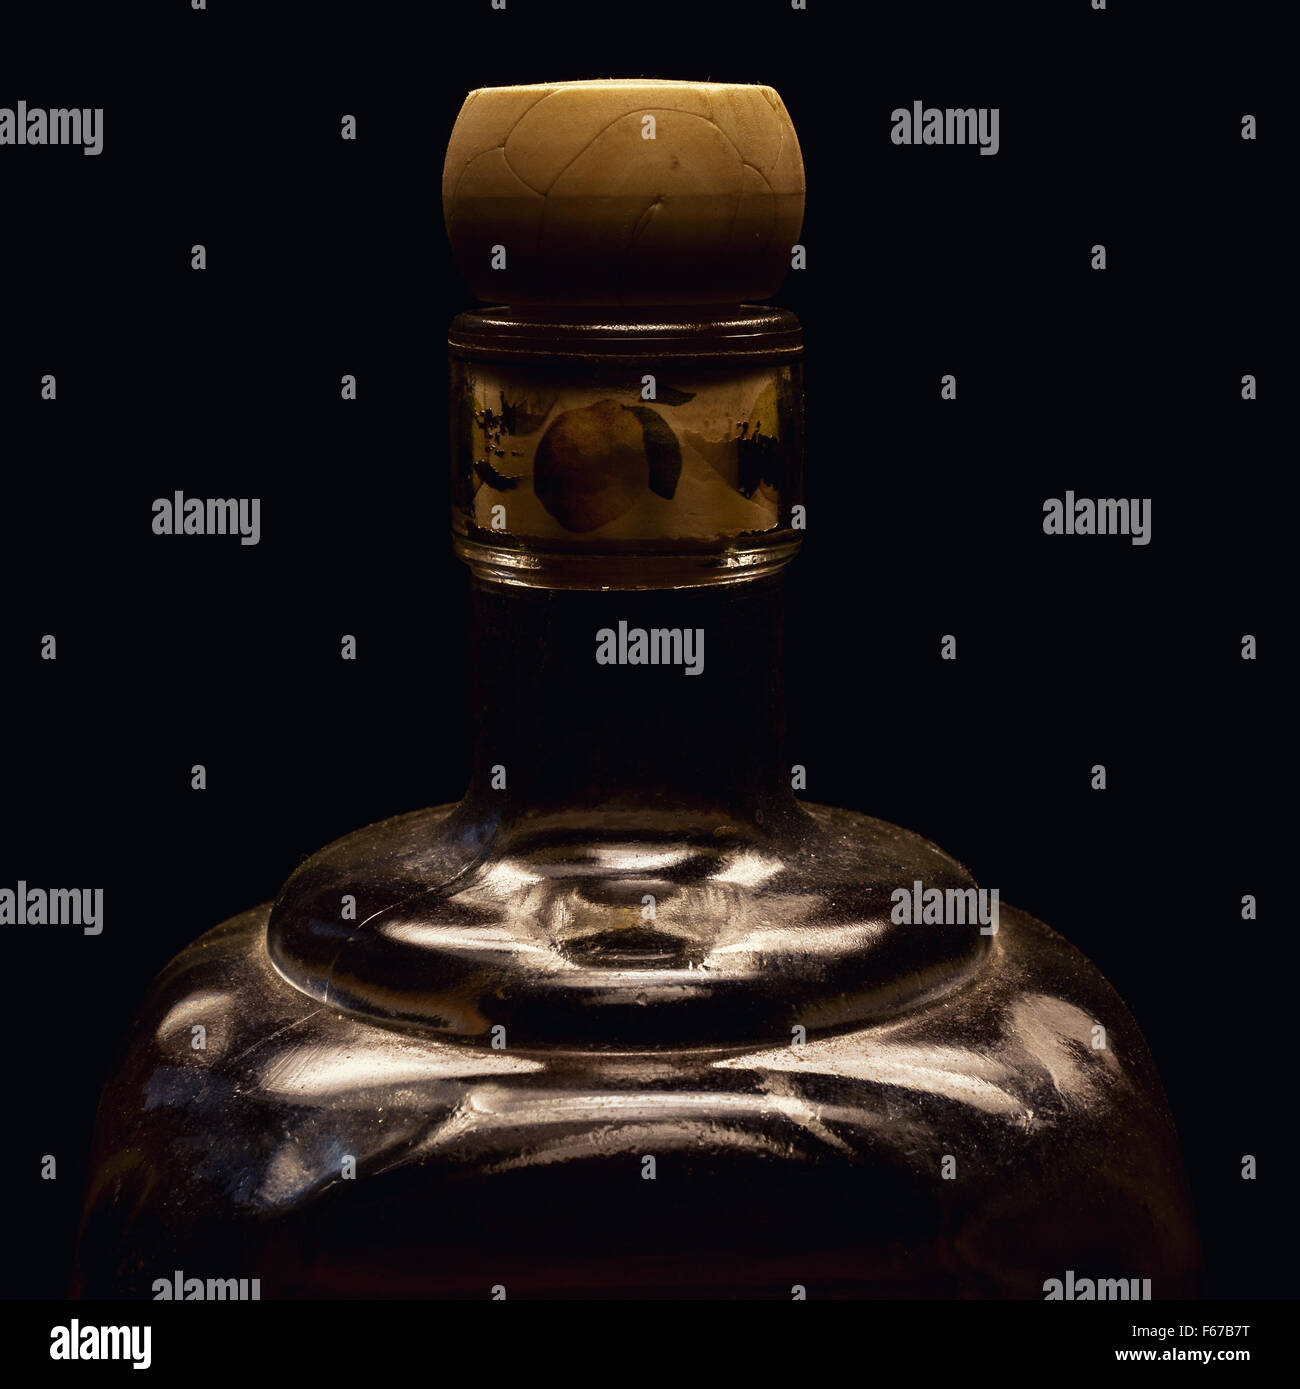 One part of an old spirit bottle, accentuated shapes with light, on black background. Stock Photo